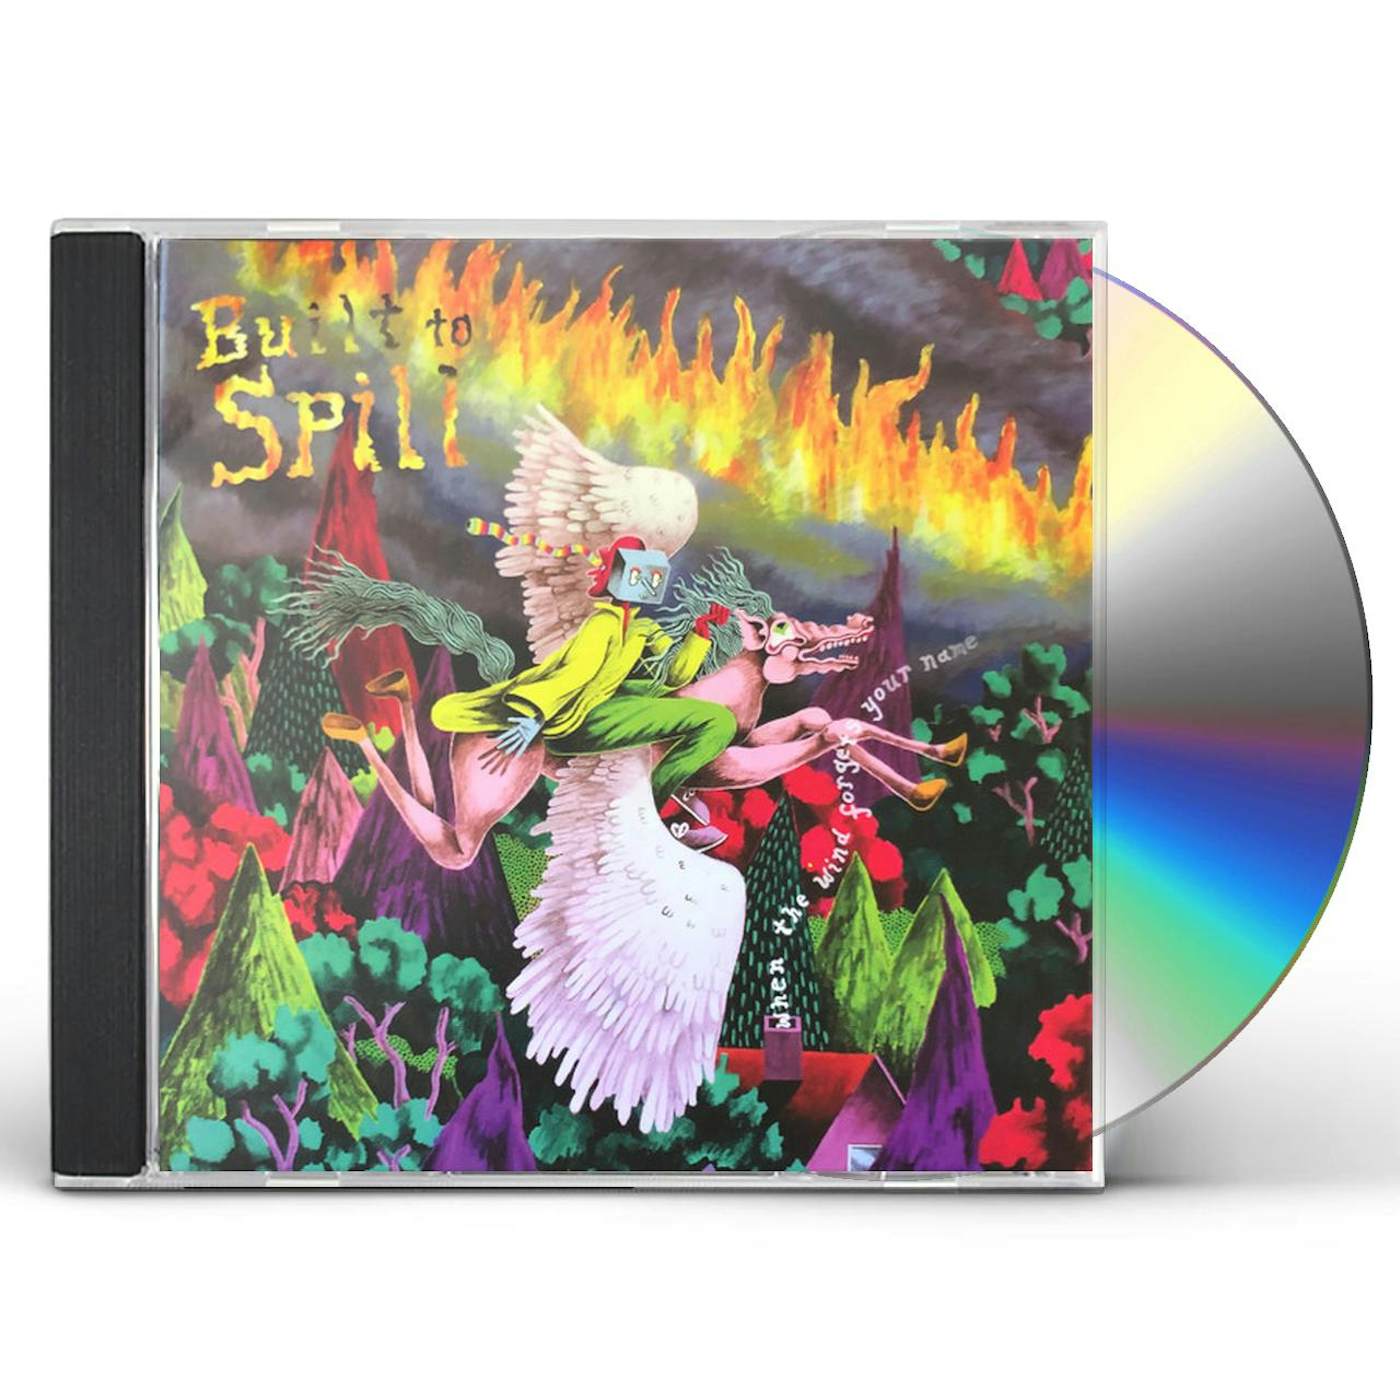 Built To Spill WHEN THE WIND FORGETS YOUR NAME CD